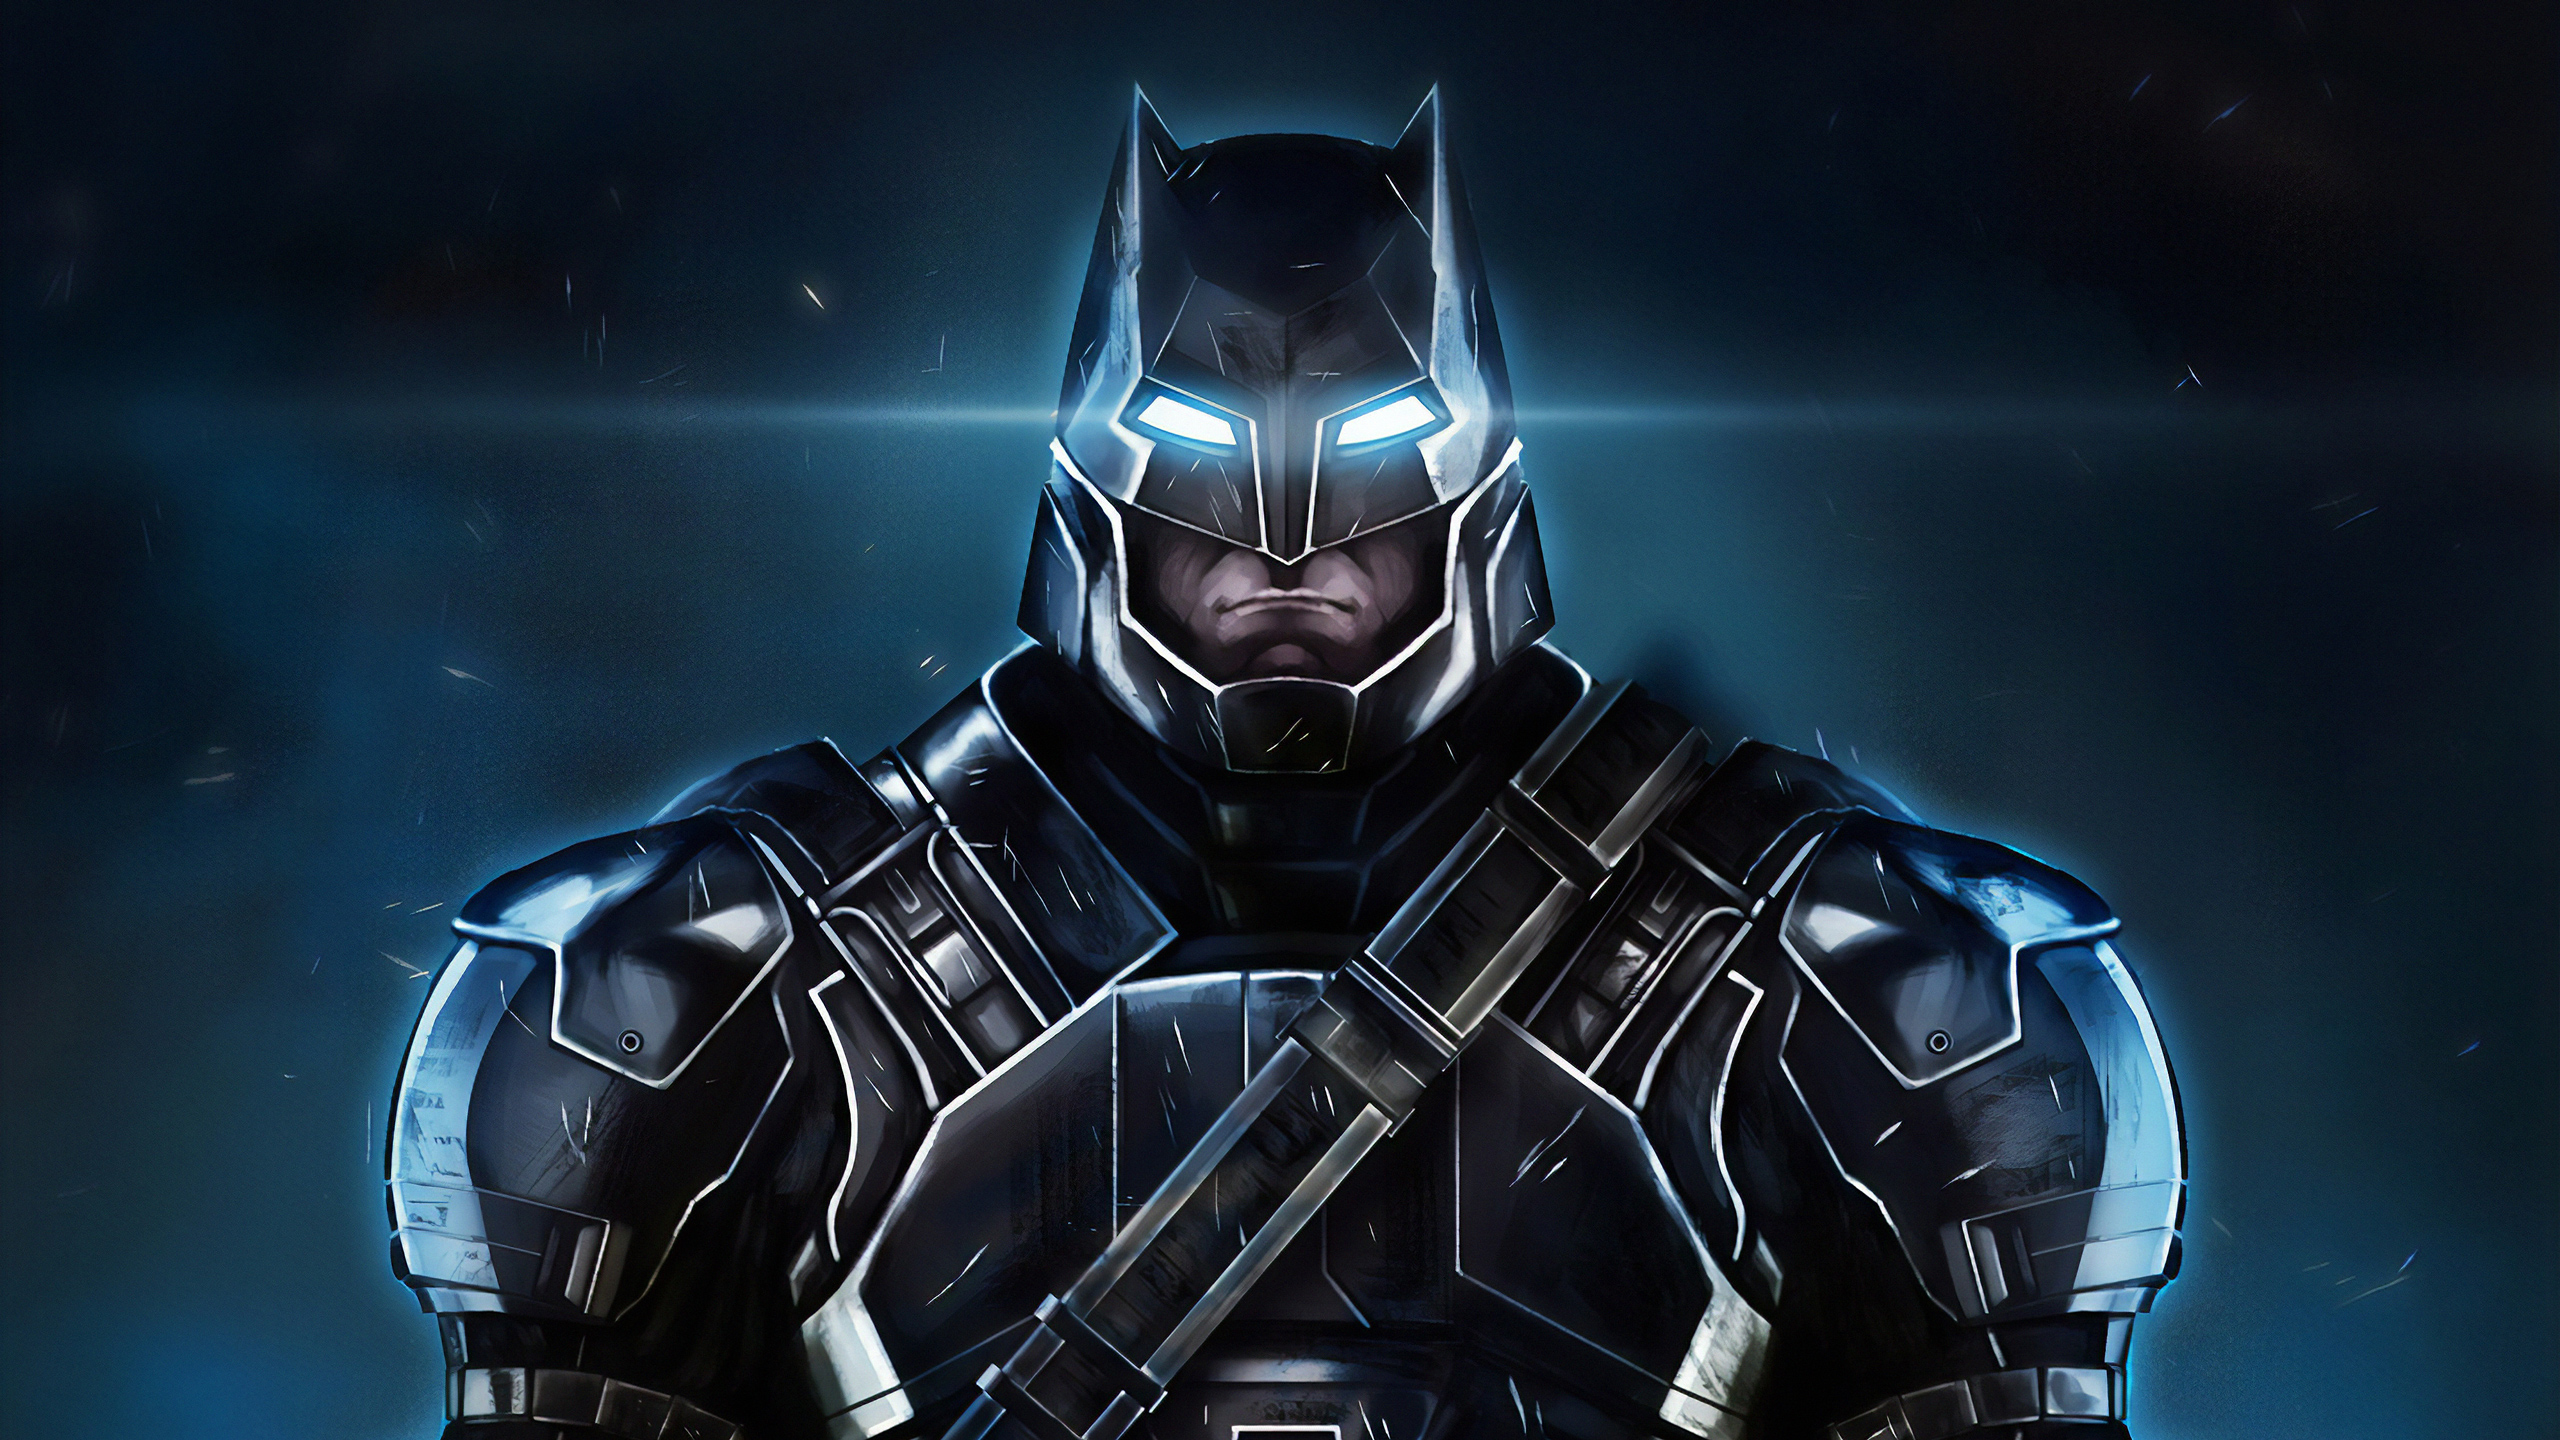 Batman Armoured Art, HD Superheroes, 4k Wallpaper, Image, Background, Photo and Picture